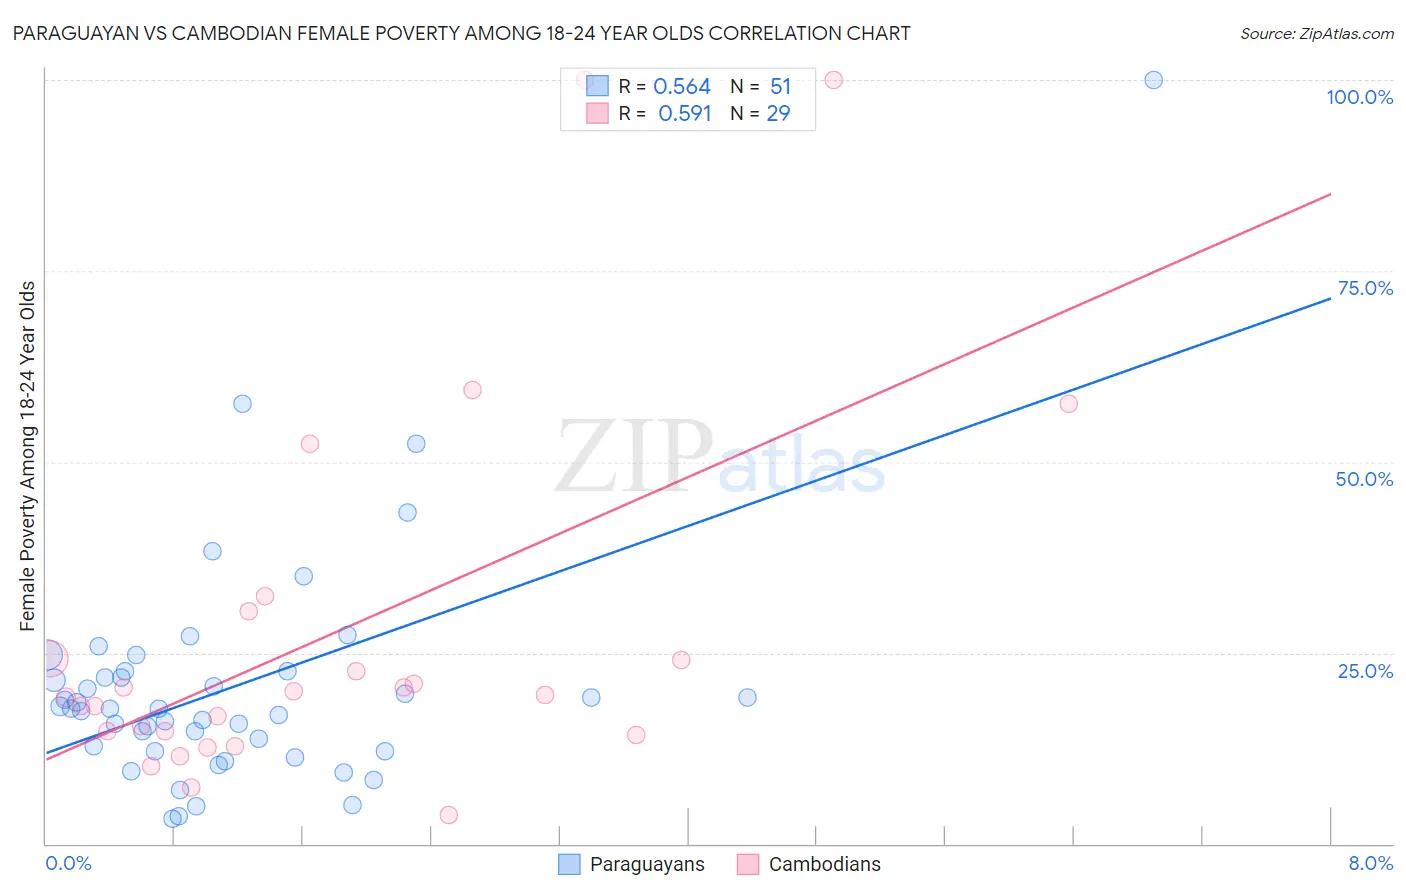 Paraguayan vs Cambodian Female Poverty Among 18-24 Year Olds